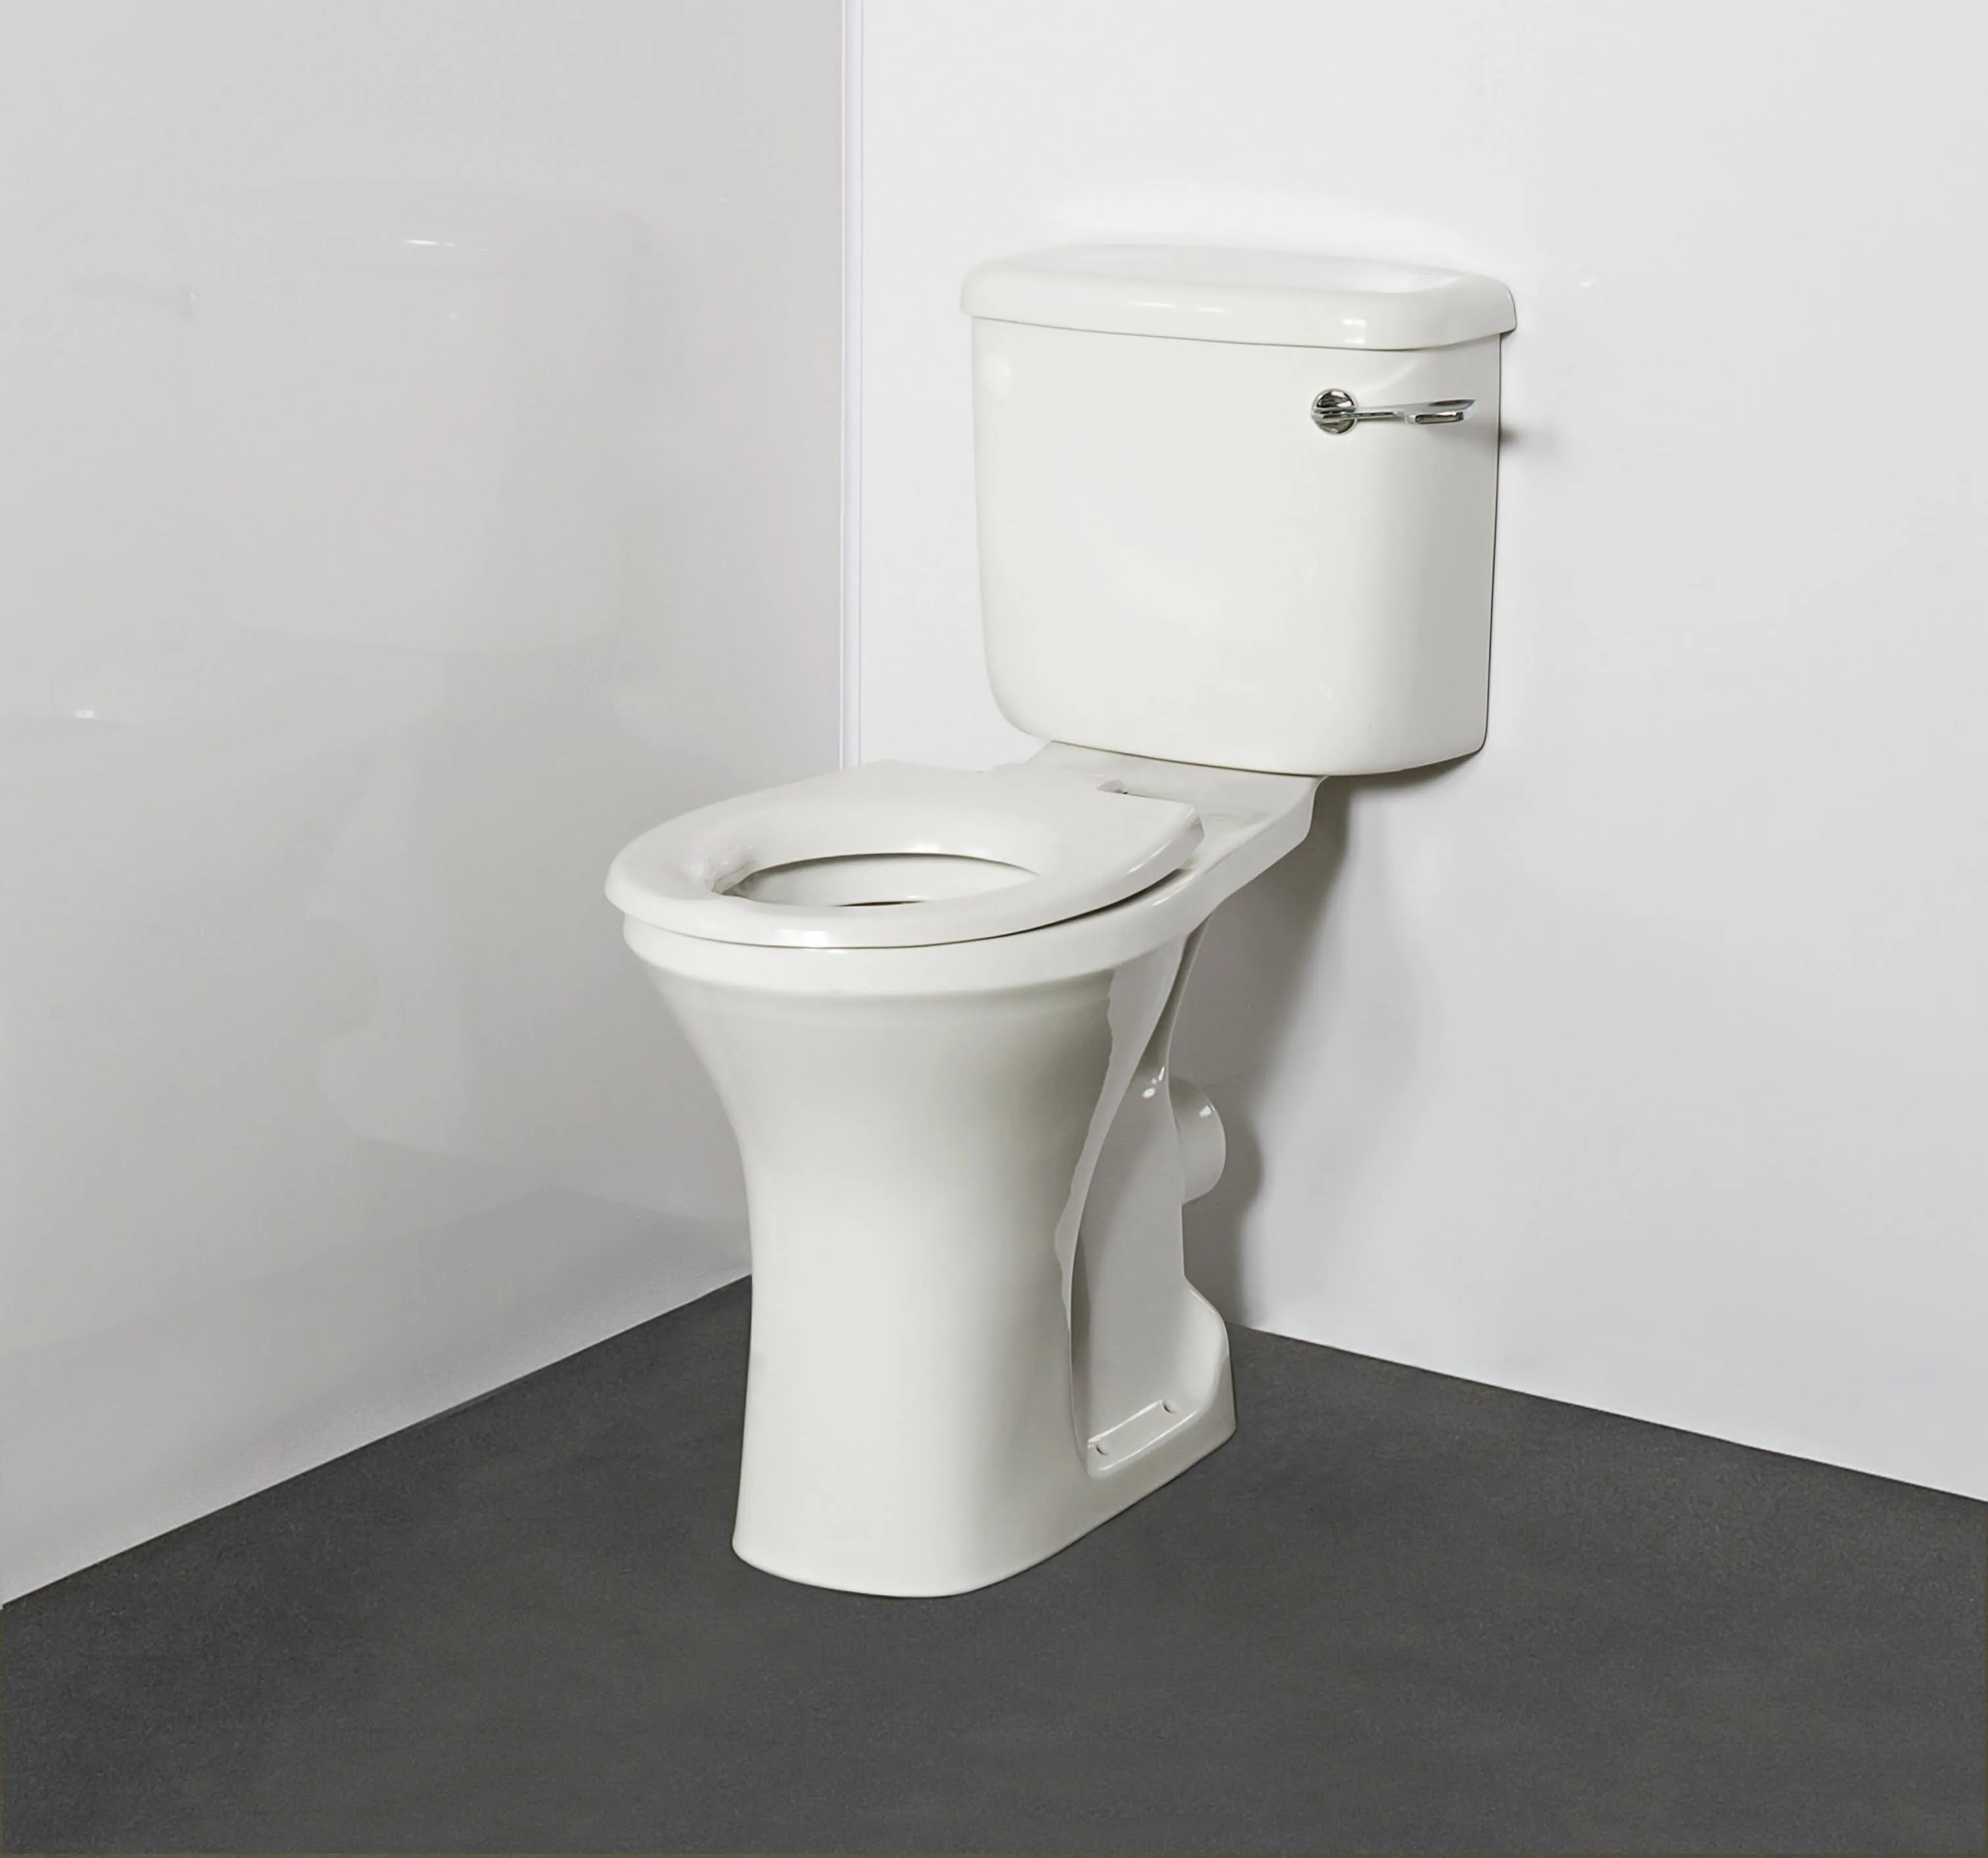 NymaPRO Comfort Height Close Coupled Toilet with Pan, Cistern & White Toilet Seat - WARESET/WH